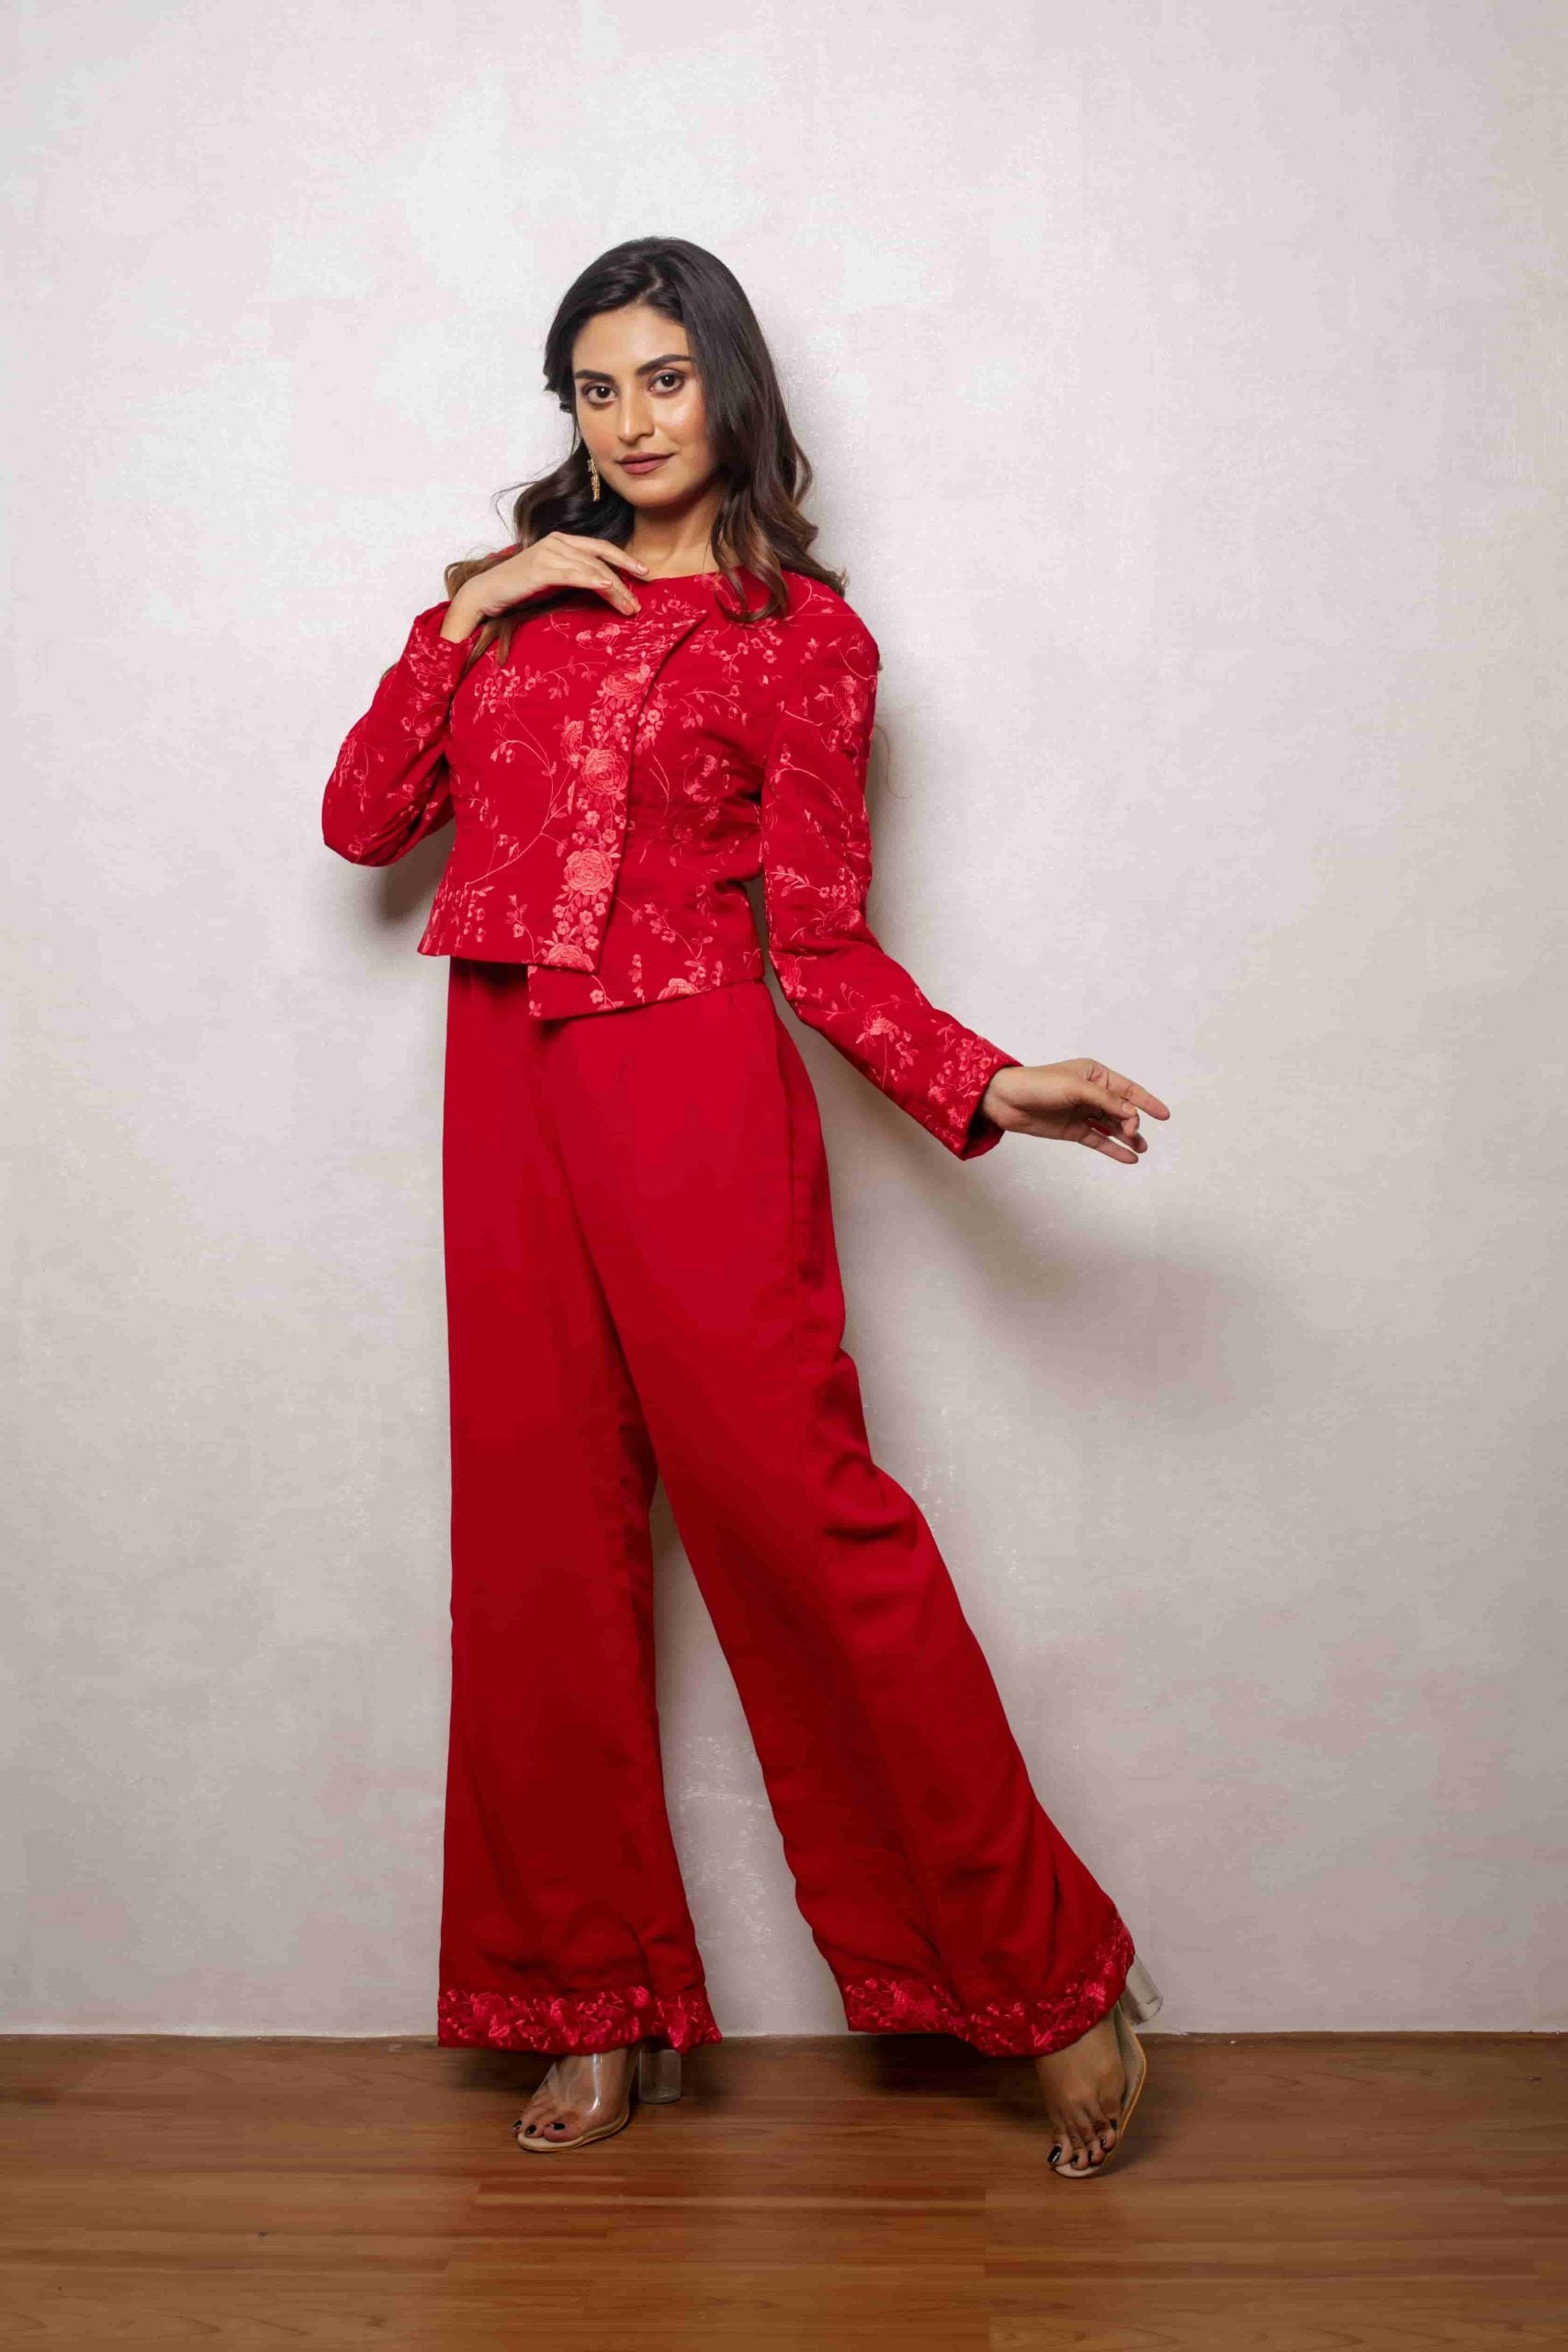 Fashion-forward red jumpsuit